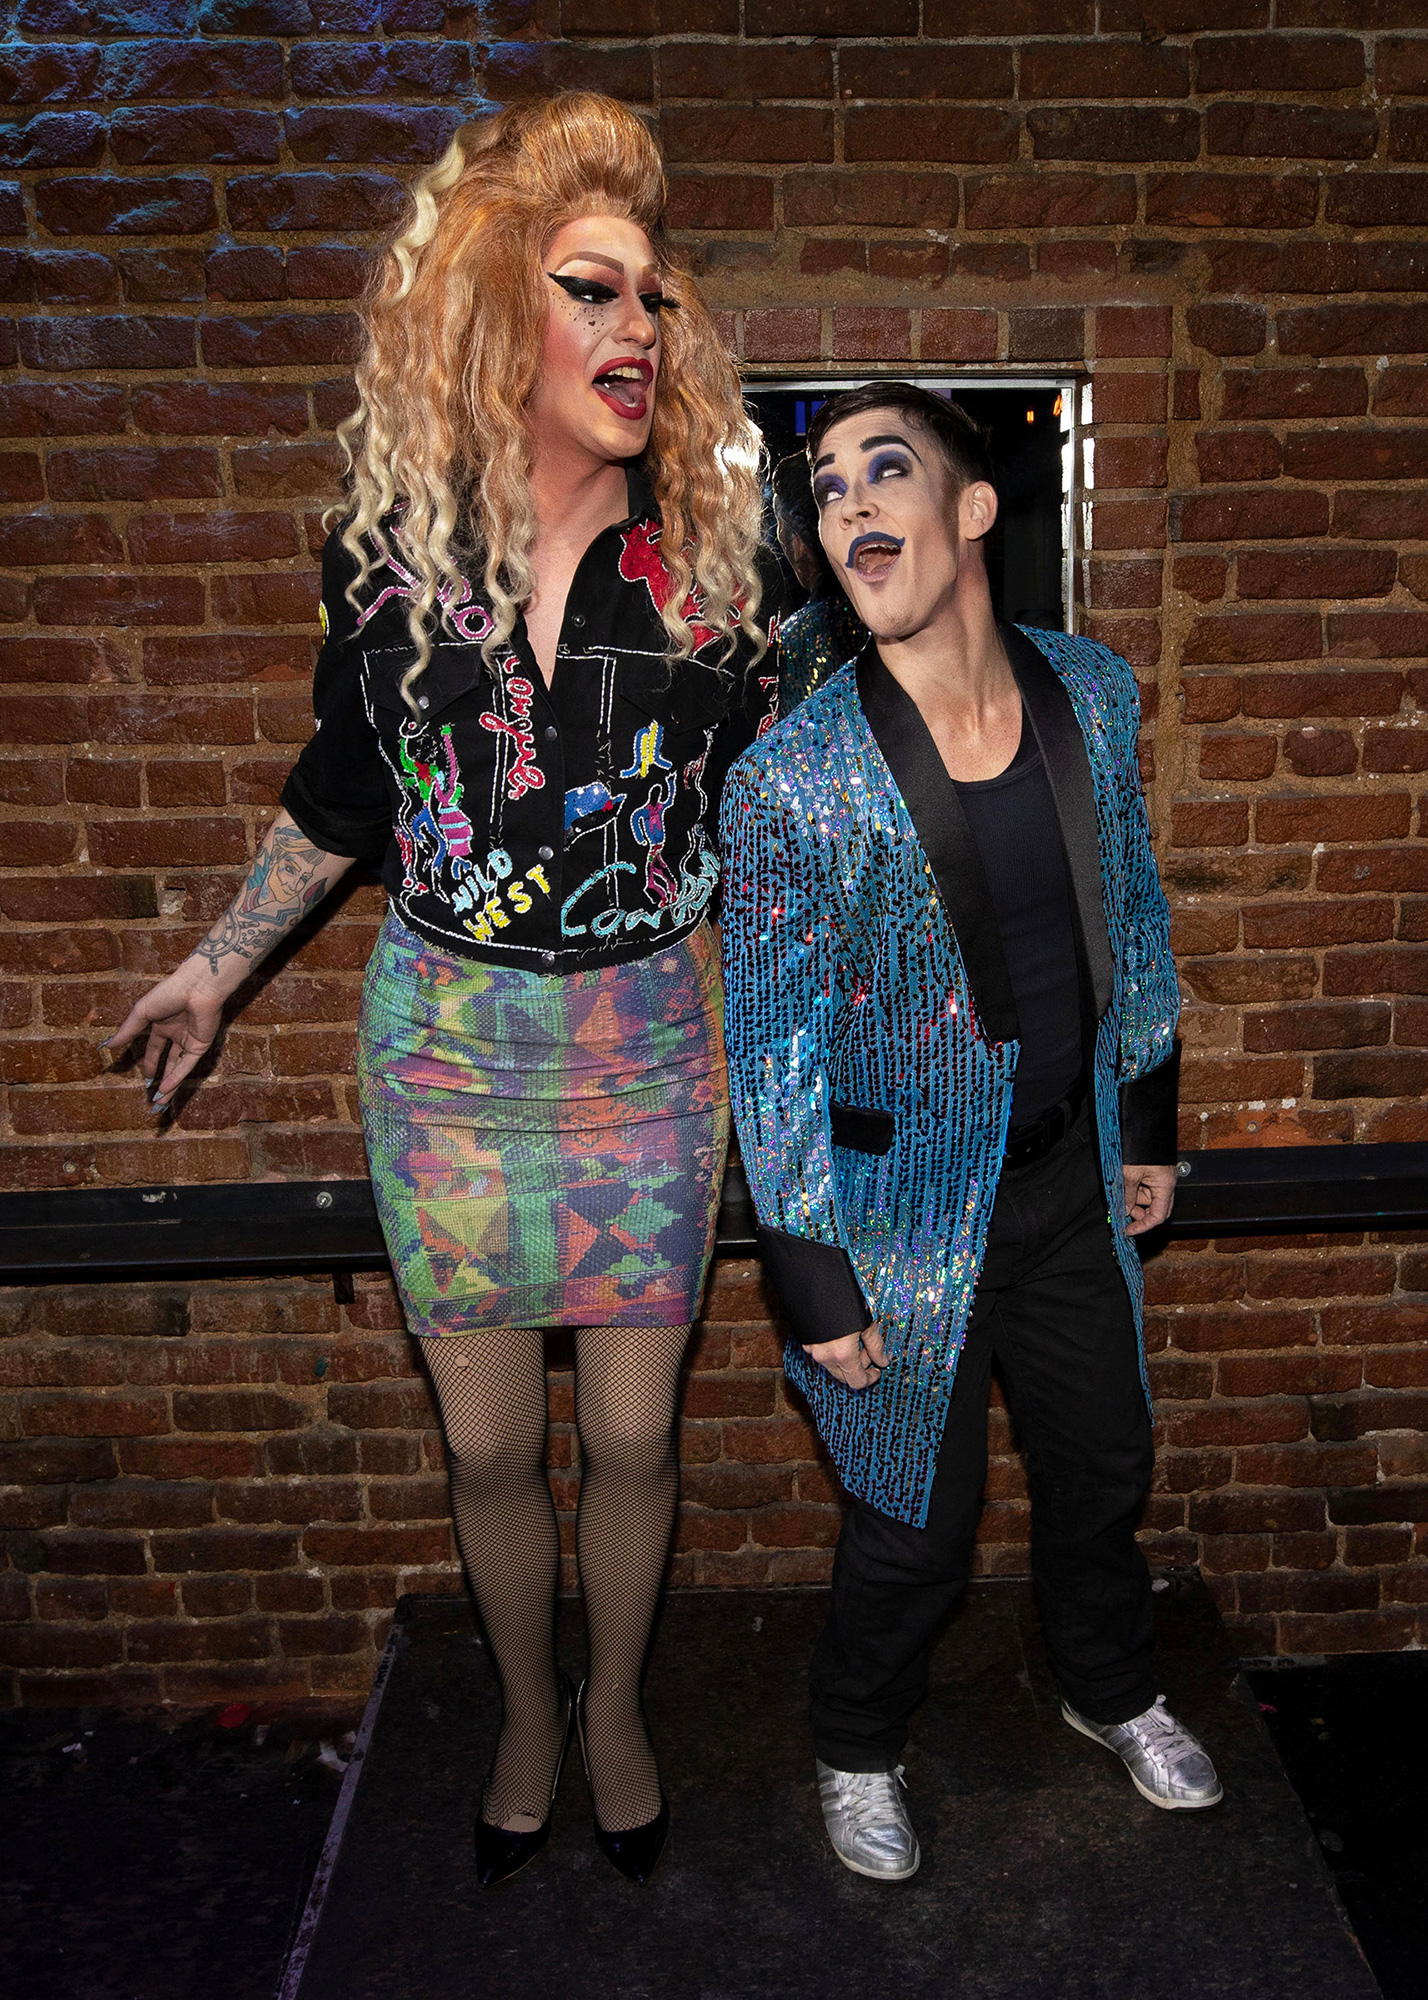 Two drag performers standing together against the backdrop of a brick wall in a performance venue. On the left is Kai Lee Mykels, who has long, curly blonde hair and wears a “Wild West” black denim jacket and a colorful mini-skirt. On the right is Trey Suits, wearing a long, blue, sequined jacket, black pants, and silver sneakers. Both performers have their mouths open, as if they are singing or speaking.